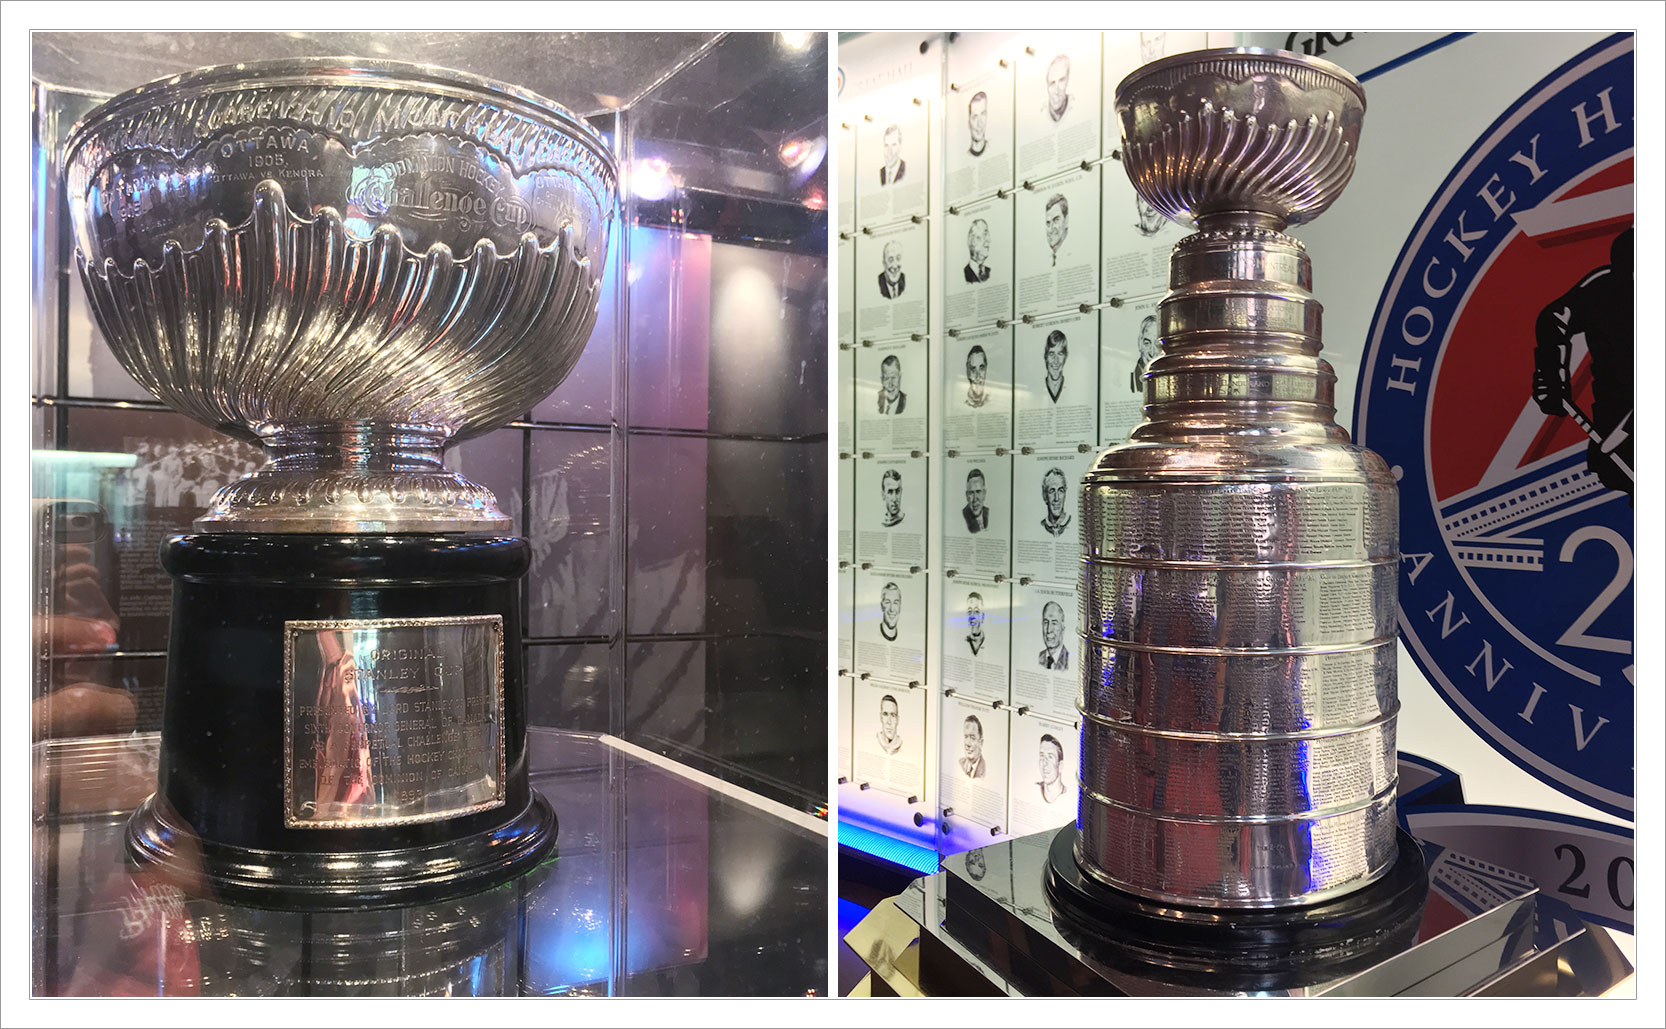 Original Stanley Cup - Presentation and Replica Stanley Cup - rta